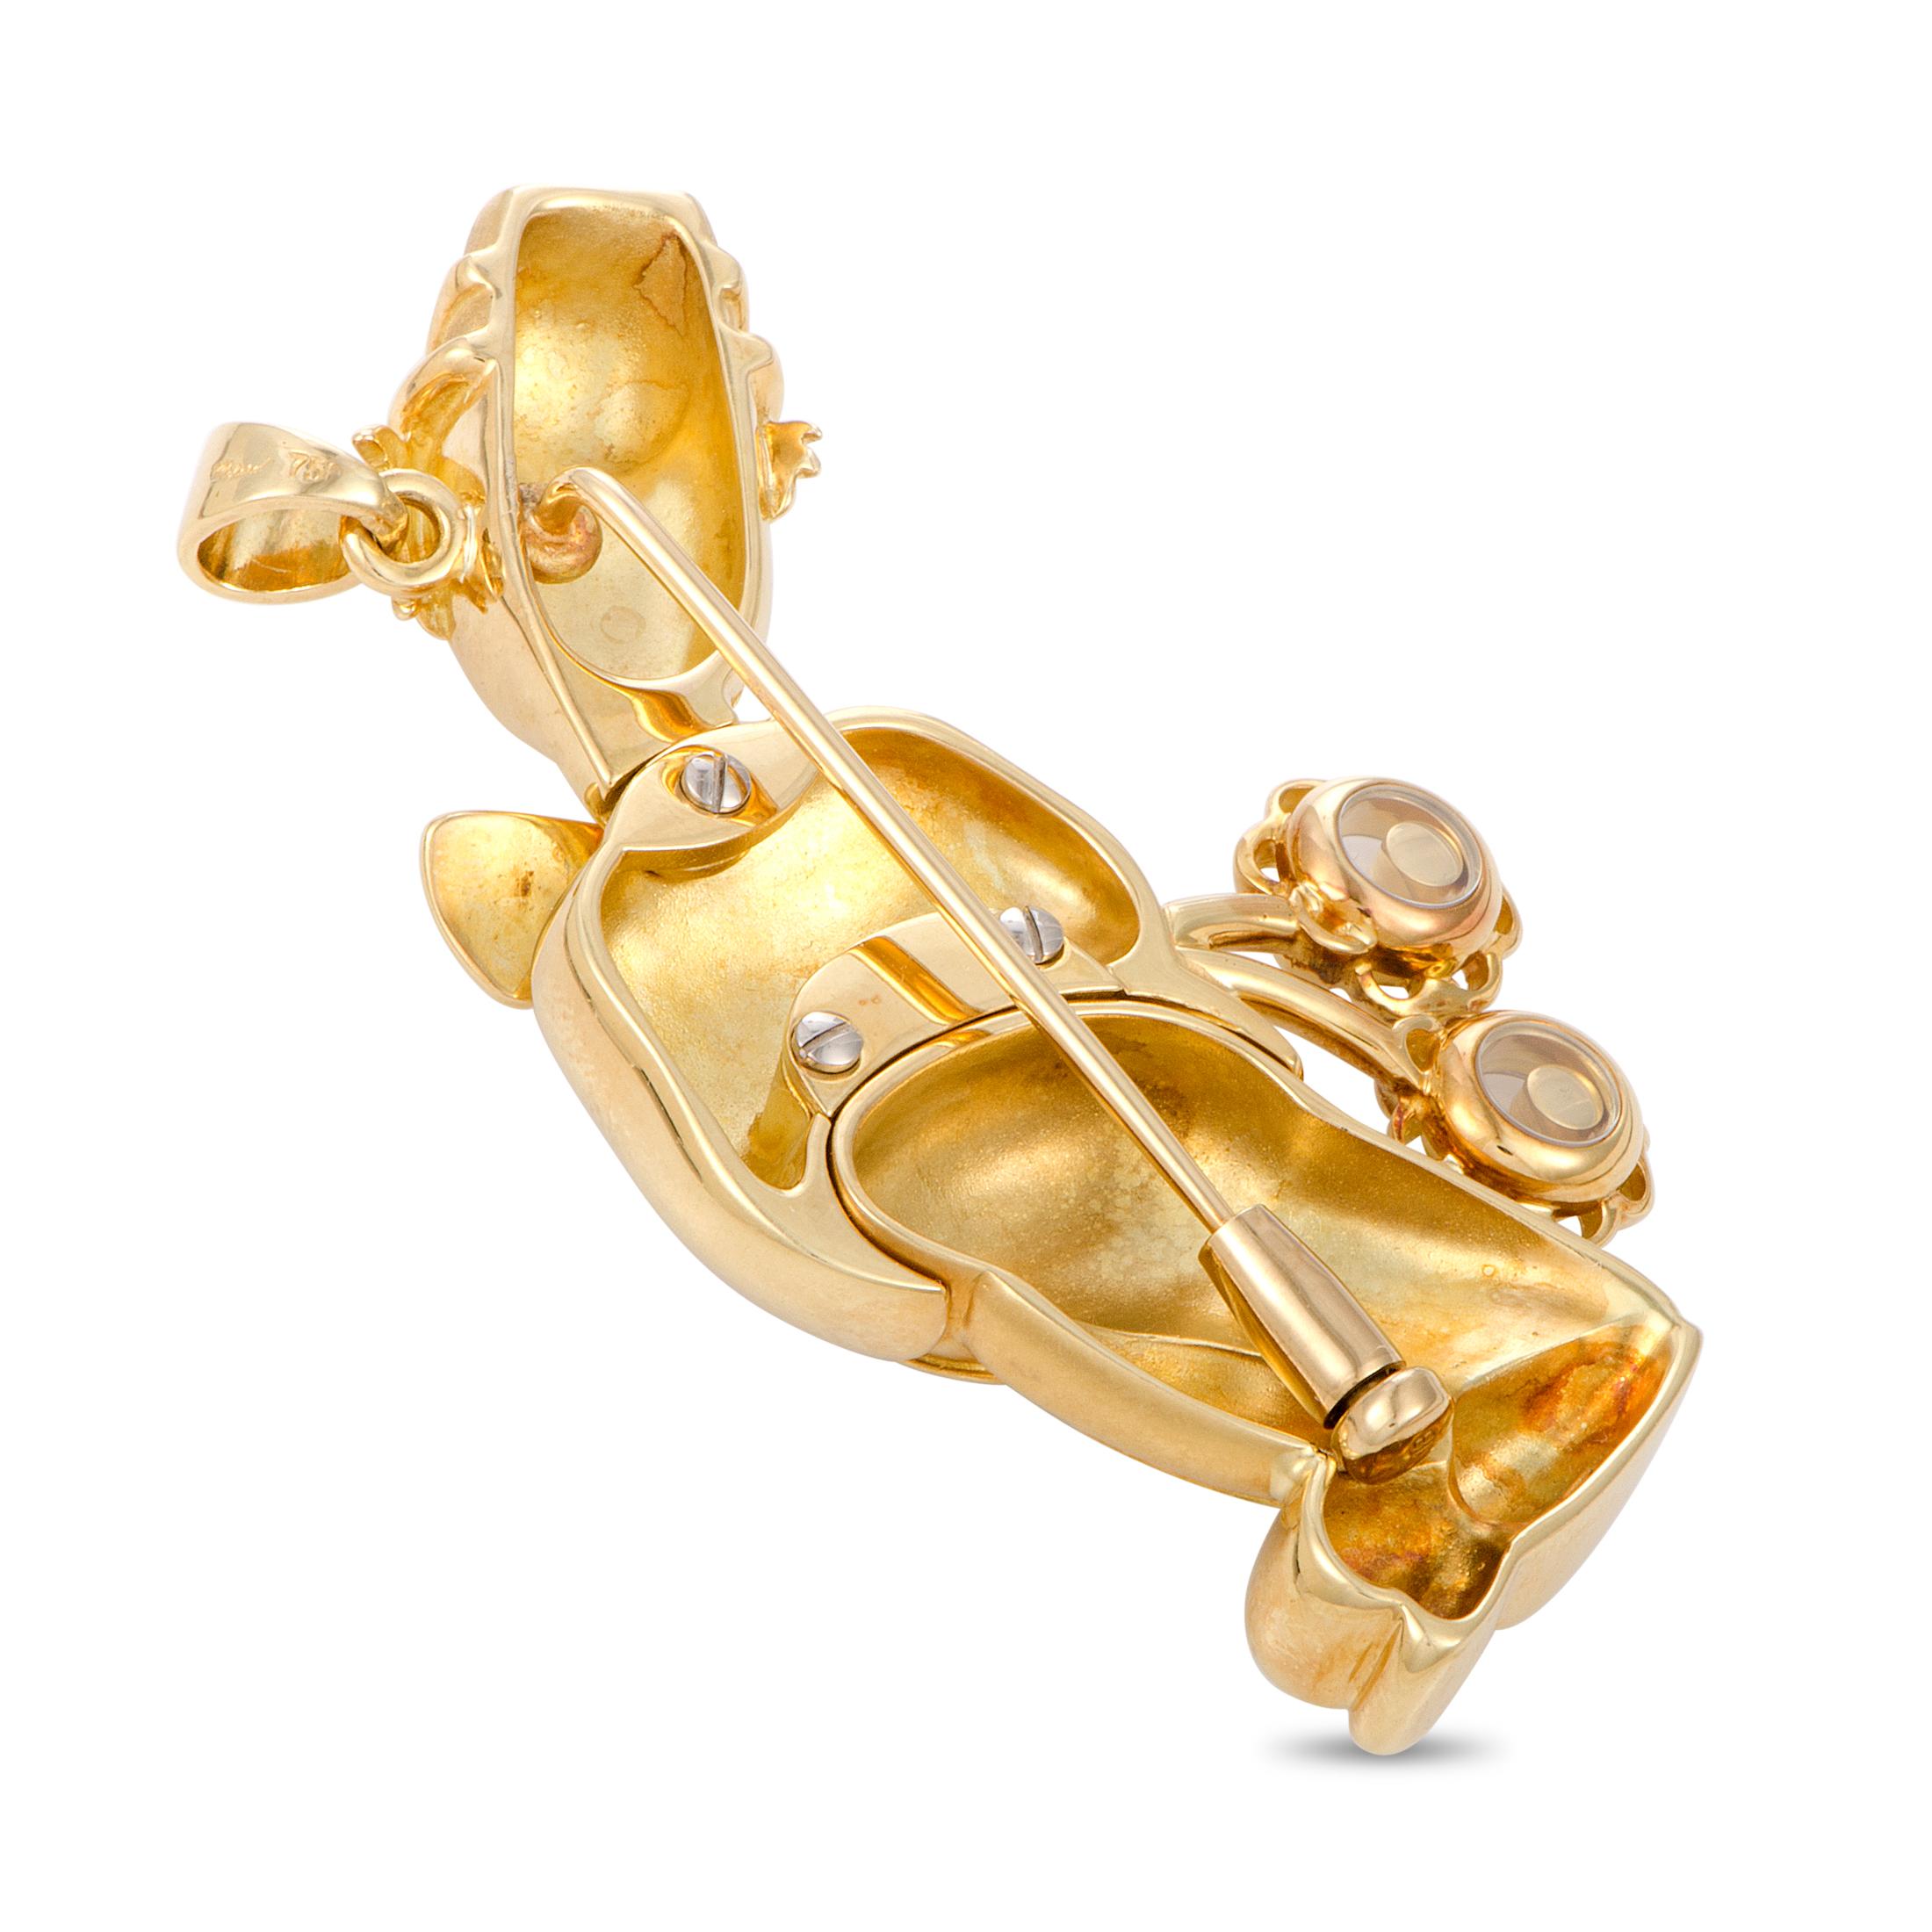 This vintage Chopard clown pendant that can also be worn as a brooch is made out of 18K yellow gold and multiple gemstones. The pendant weighs 40.7 grams, measuring 2.50” in length and 1.37” in width.

Offered in estate condition, this jewelry piece